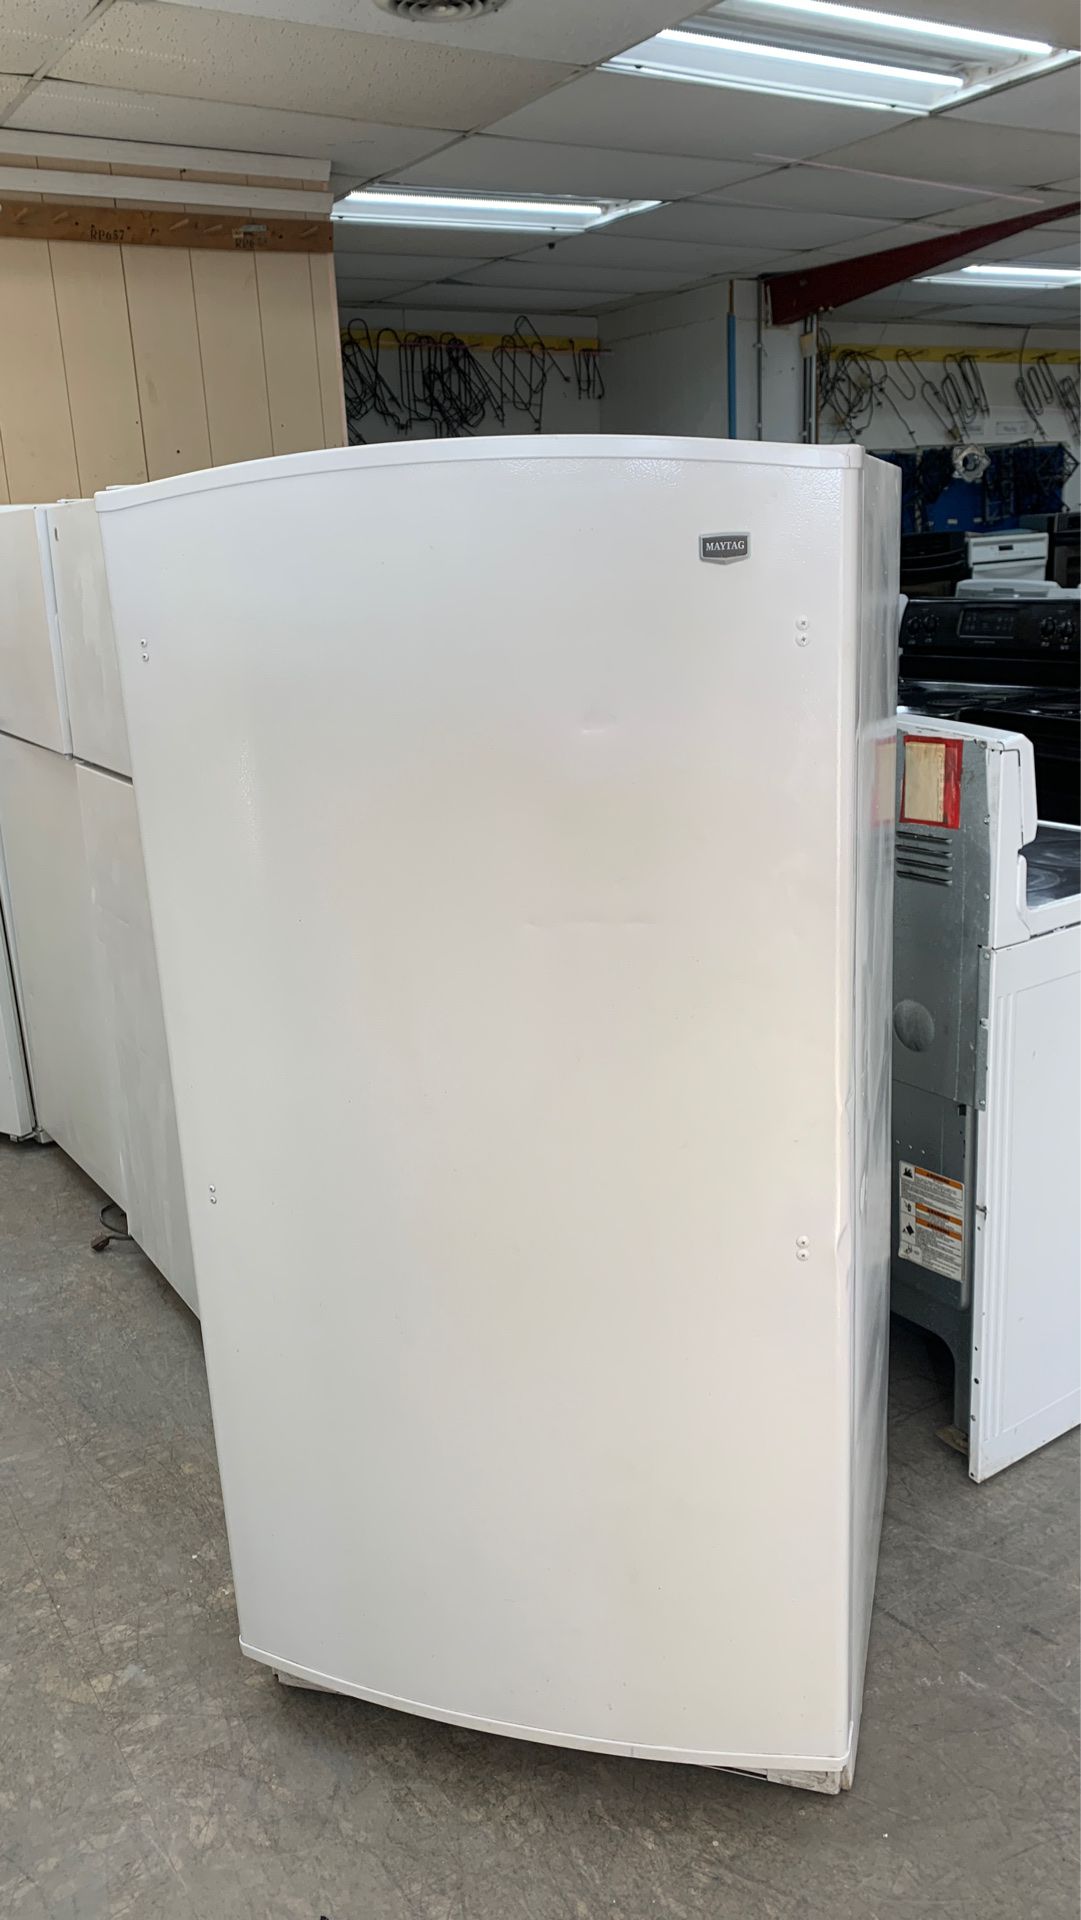 Maytag 15.7 cu. ft. Frost Free Upright Freezer in White